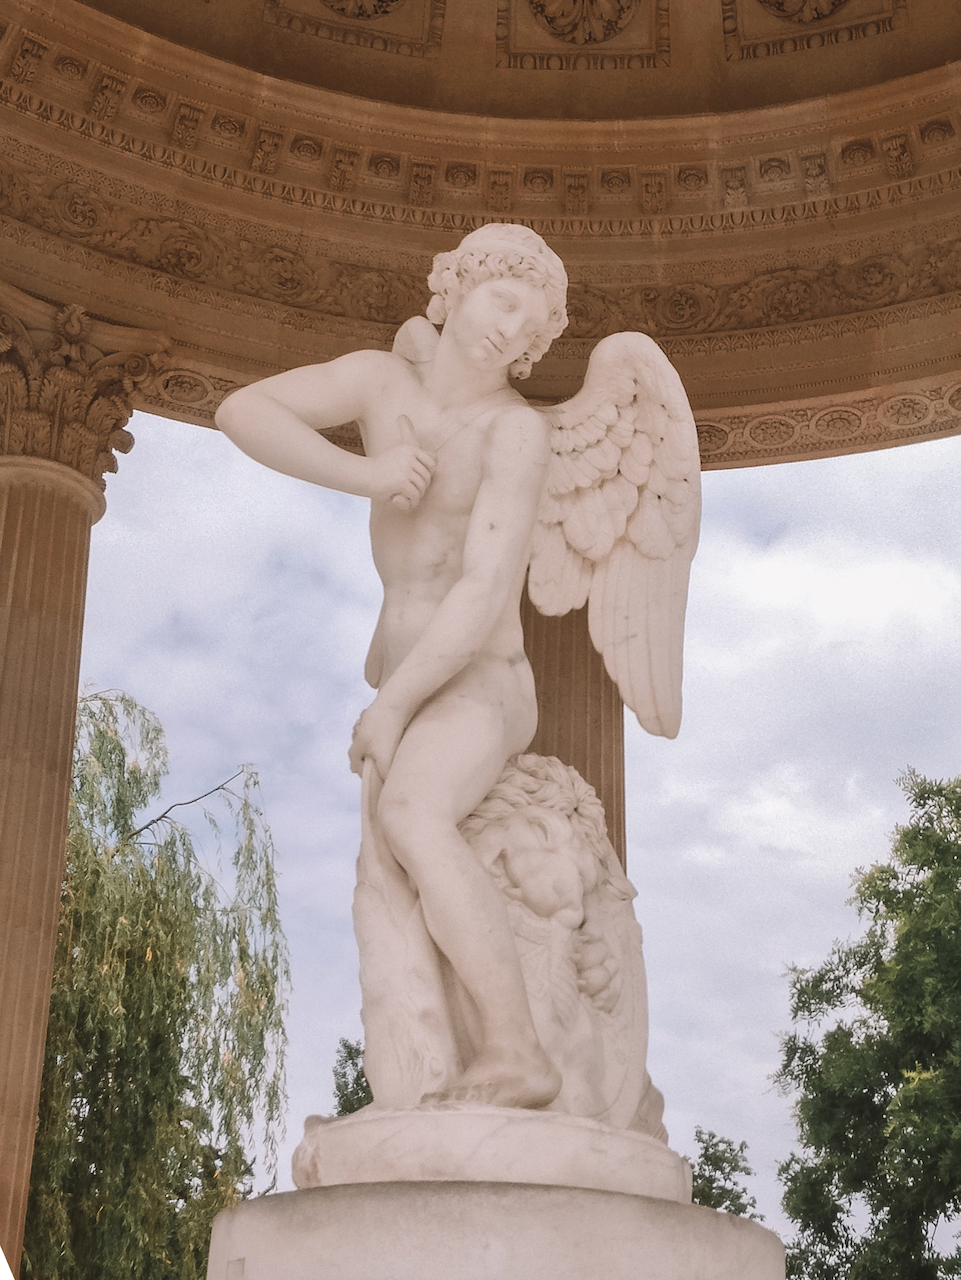 Closeup on the angle statue - Temple of Love - Estate of Trianon - Versailles Palace - France